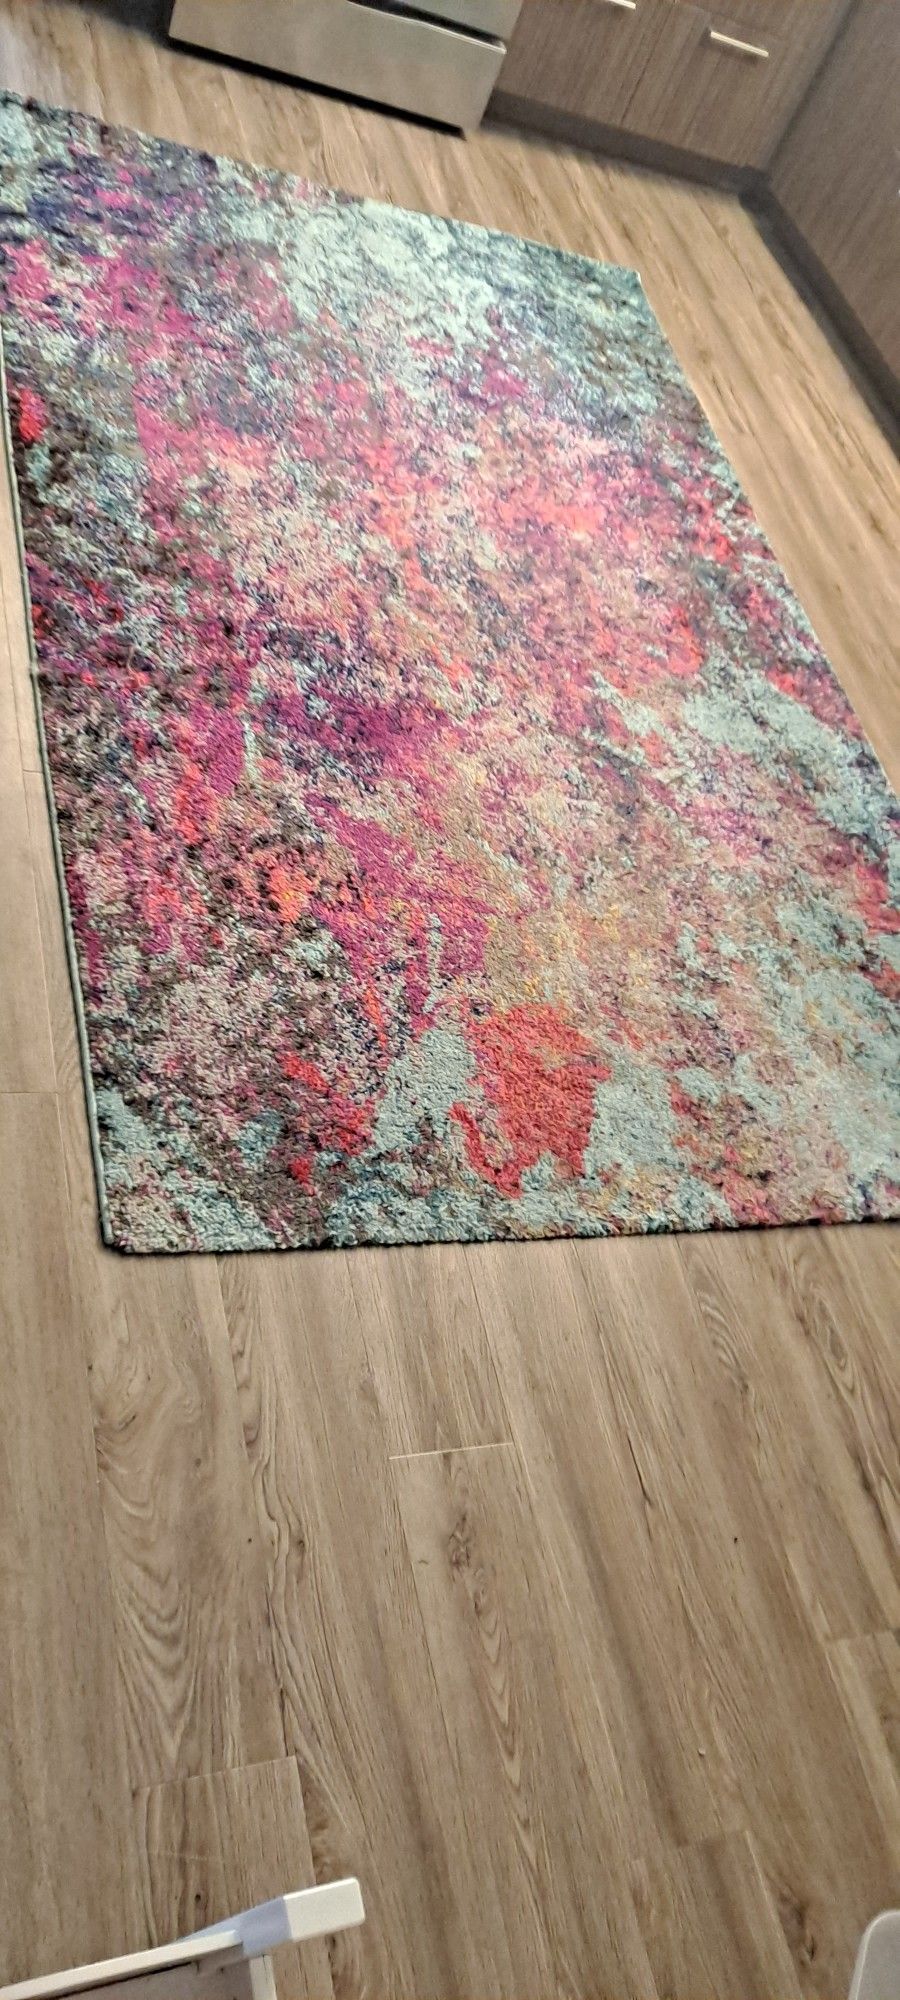 5x8 Floor Rug Multicolor Turquoise Teal Magenta Made In Turkey